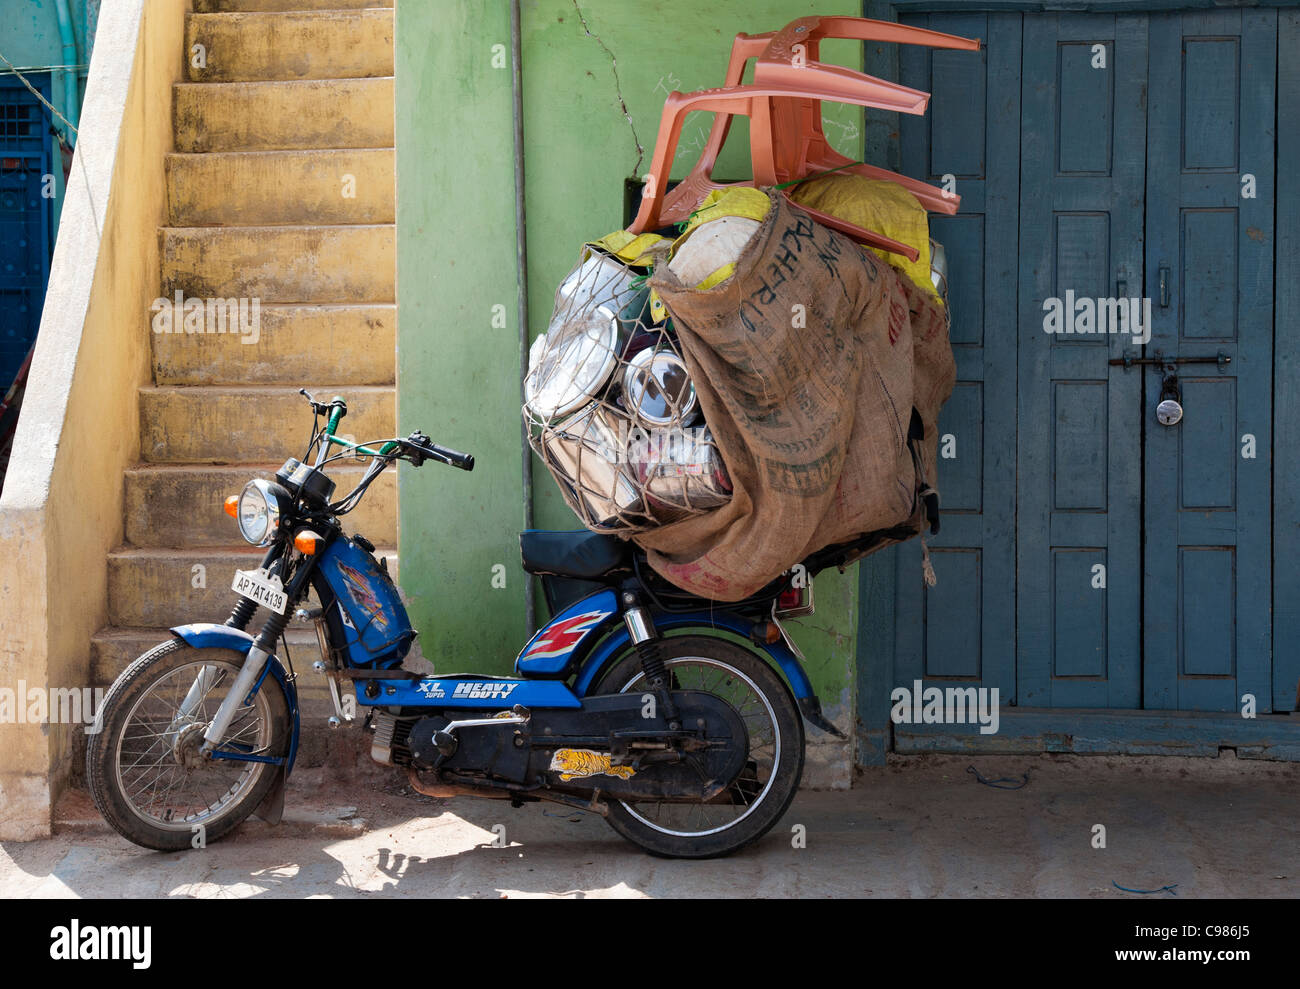 Indian moped ladened with goods to sell to local shops on the streets of Puttaparthi, Andhra Pradesh, India Stock Photo